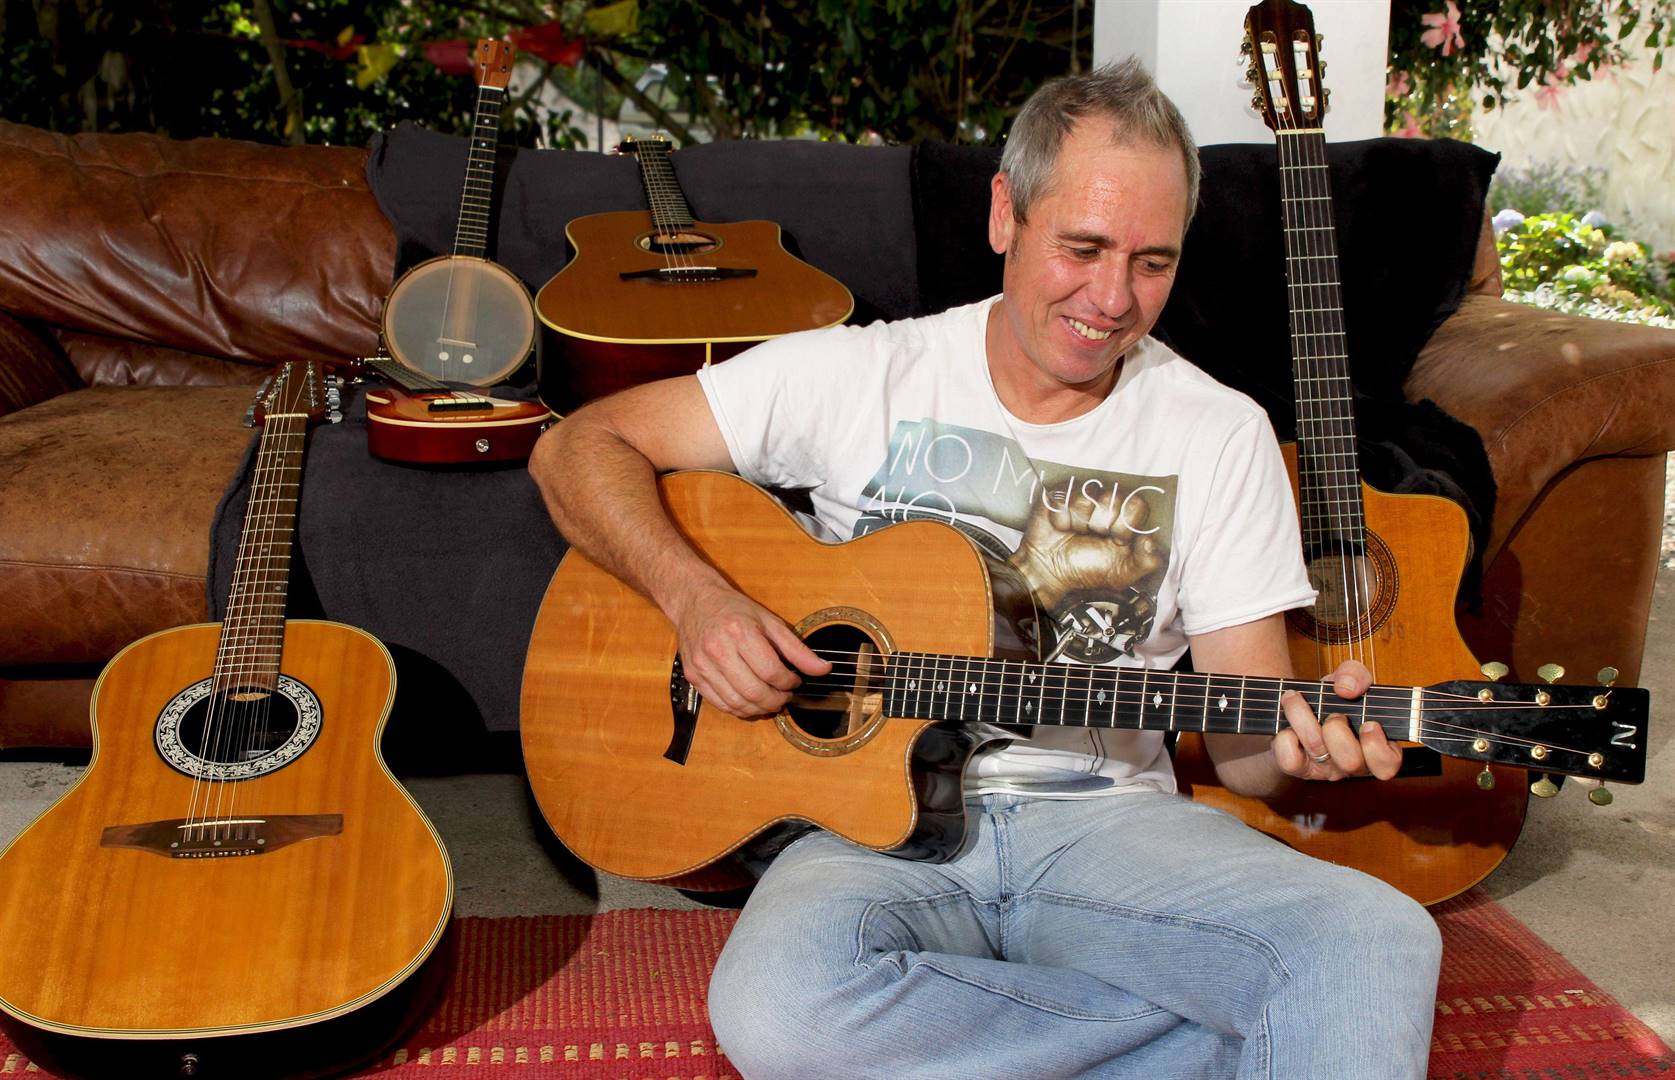 Barry Thomson will be performing at the Rhumbelow Theatre - Pietermaritzburg on Sunday.